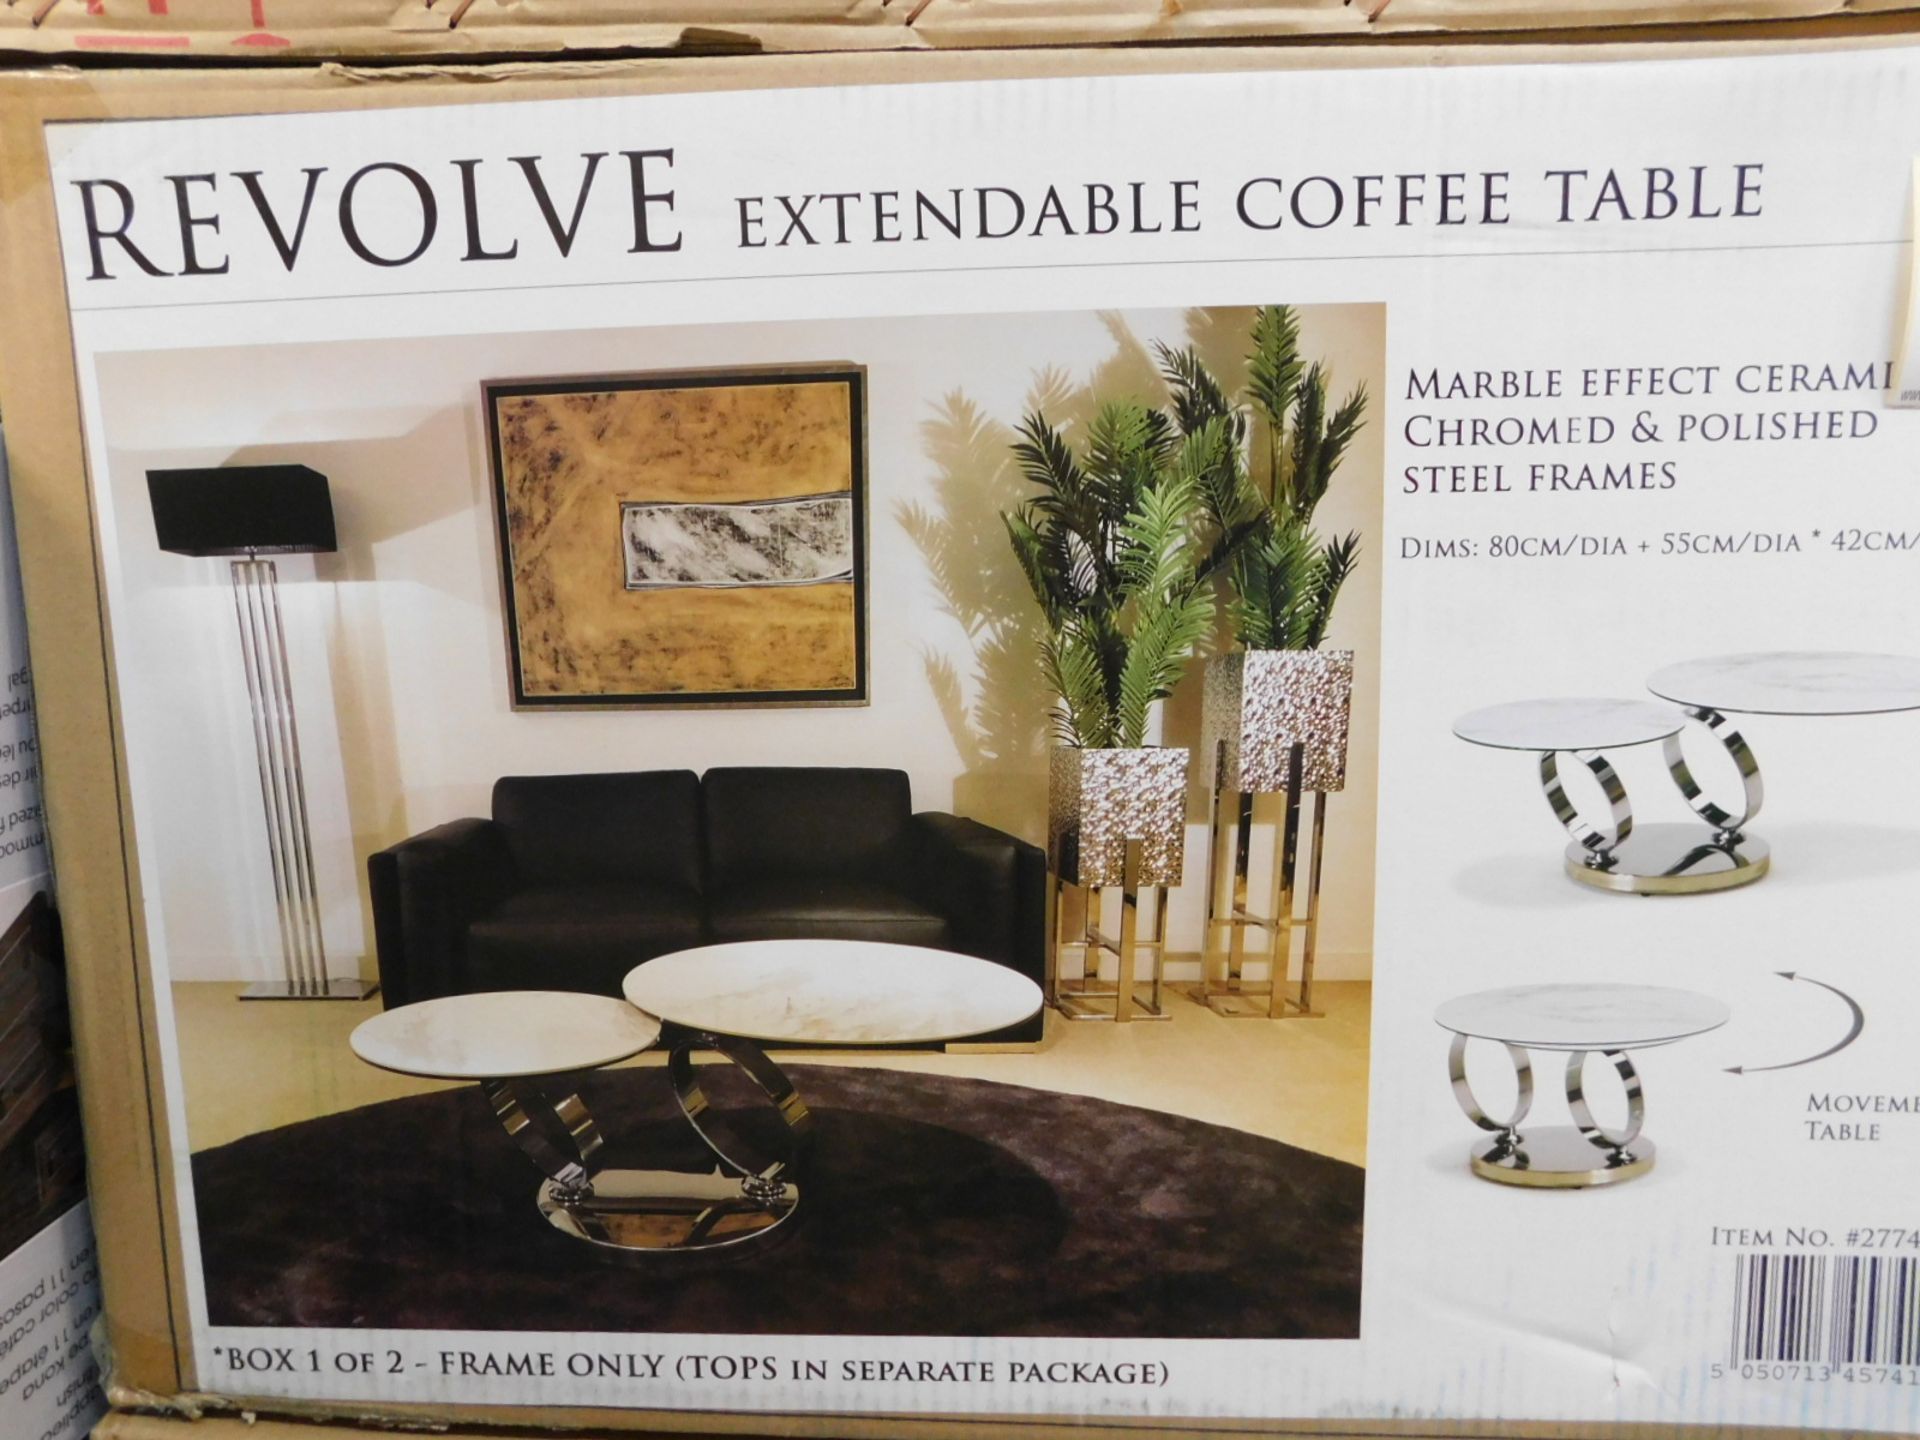 1 BRAND NEW BOXED DESIGNER MARBLE TOP REVOLVE EXTENDABLE COFFEE TABLE RRP £399 (2 BOXES)